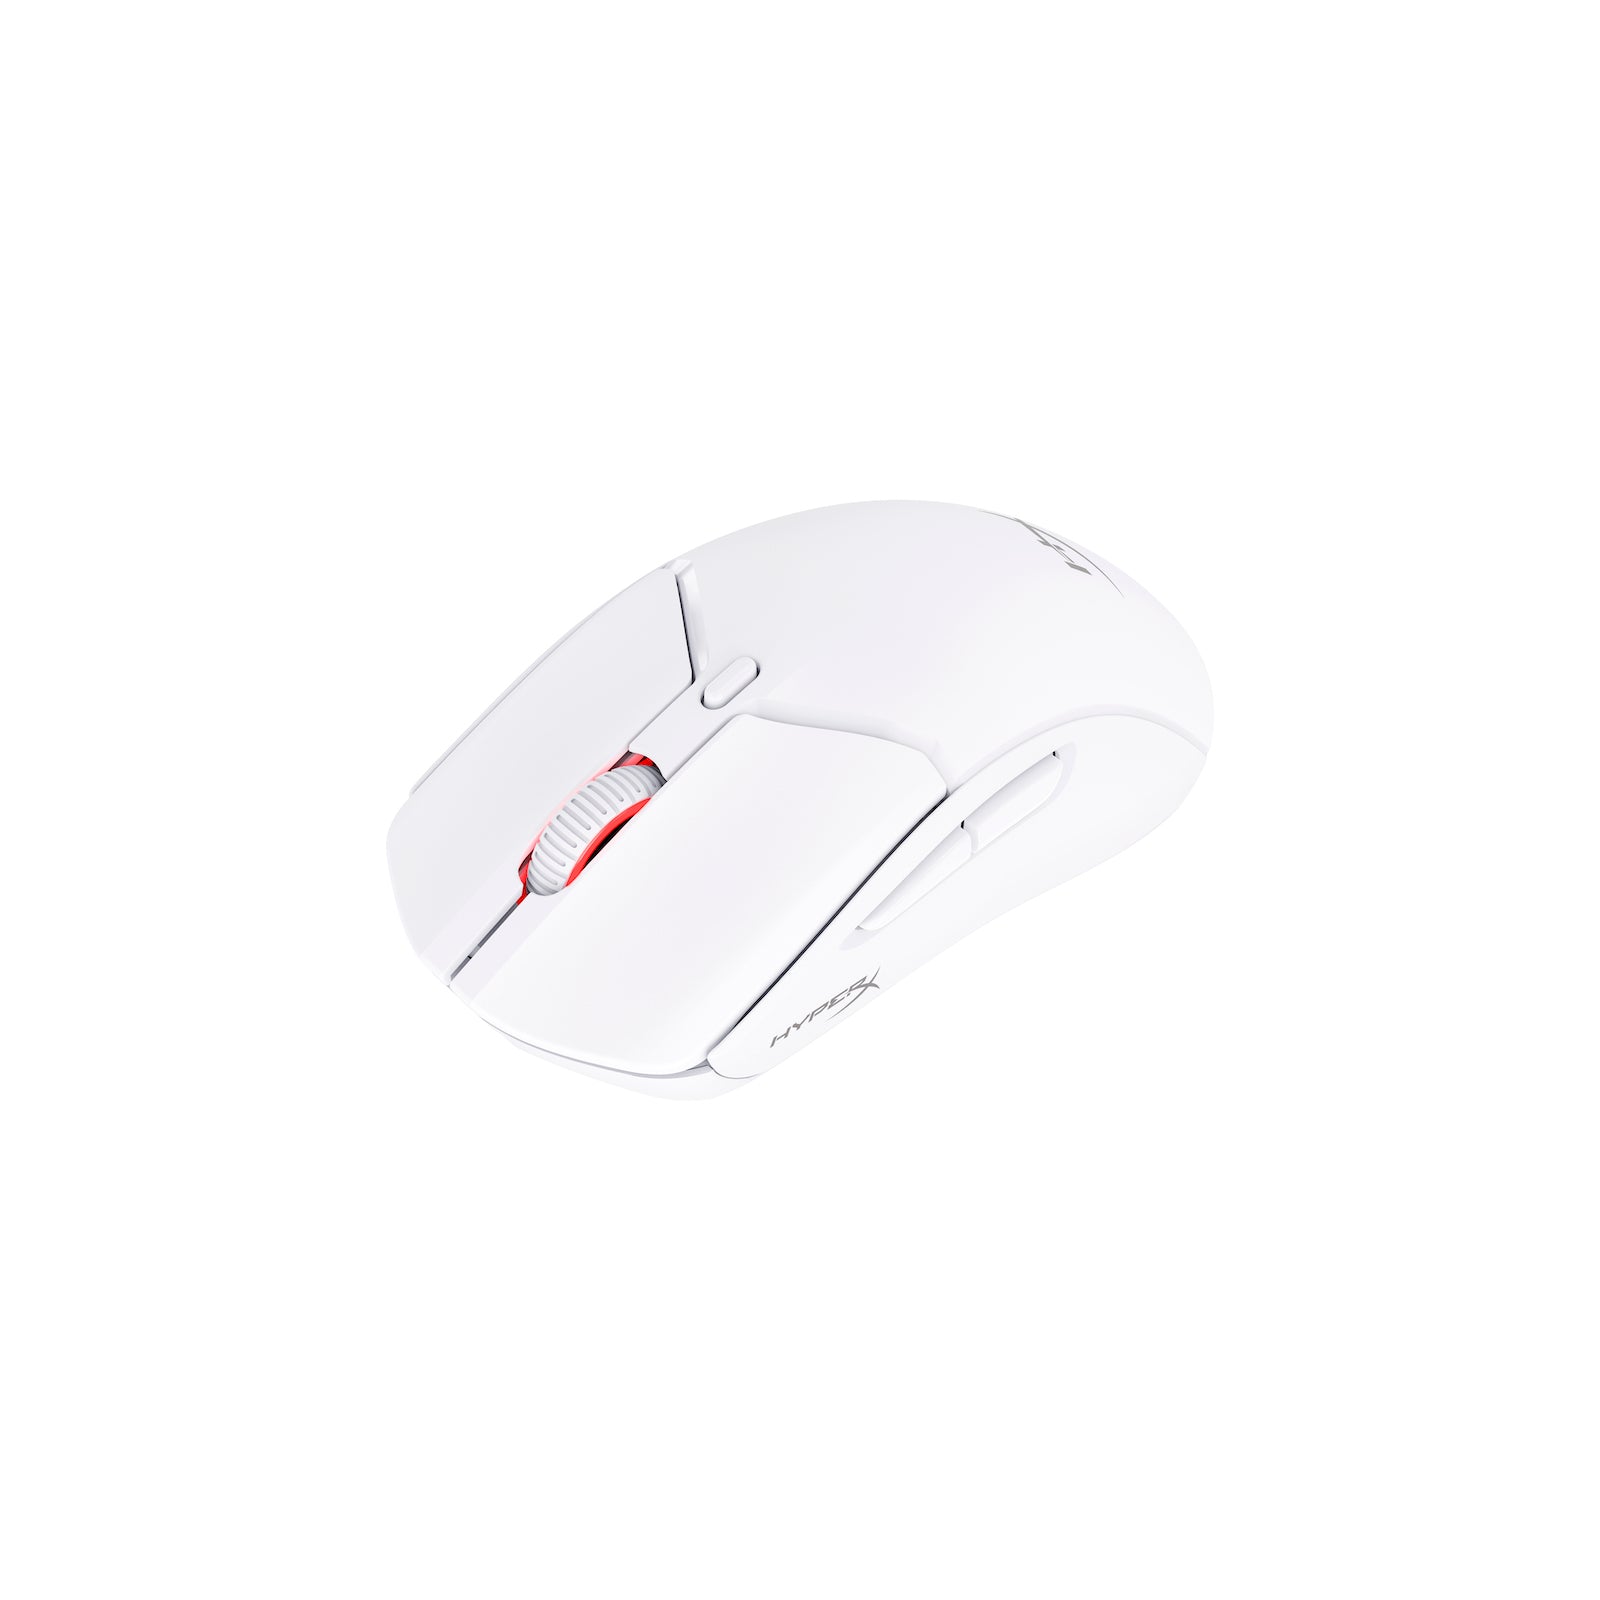 HyperX Pulsefire Haste 2 Wireless White Gaming Mouse Angled Down View